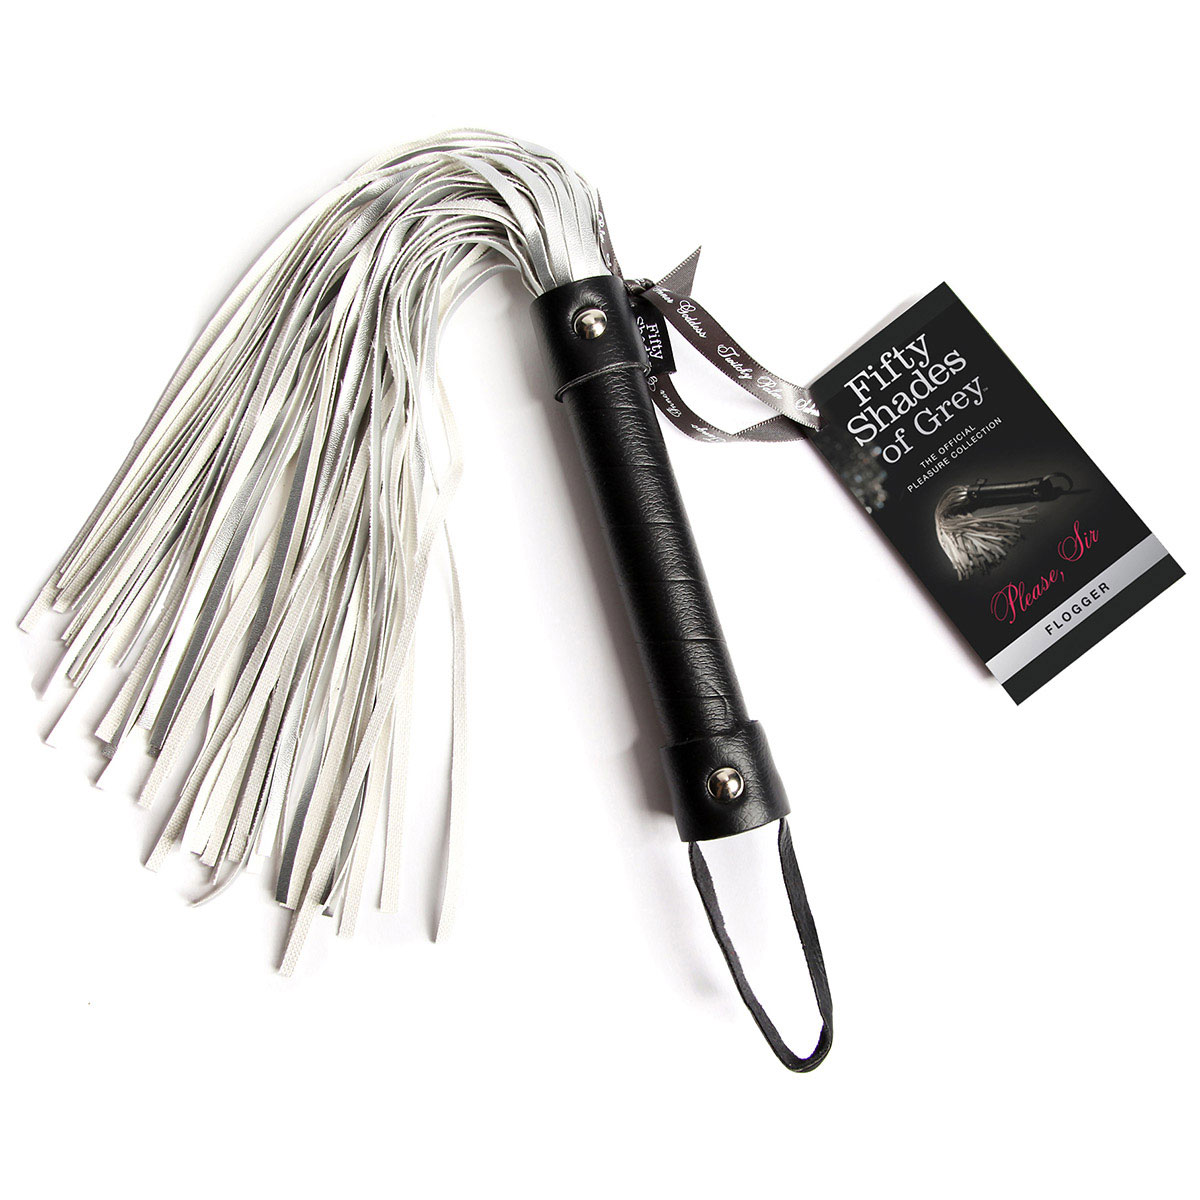 Gifts for a sir or master bdsm